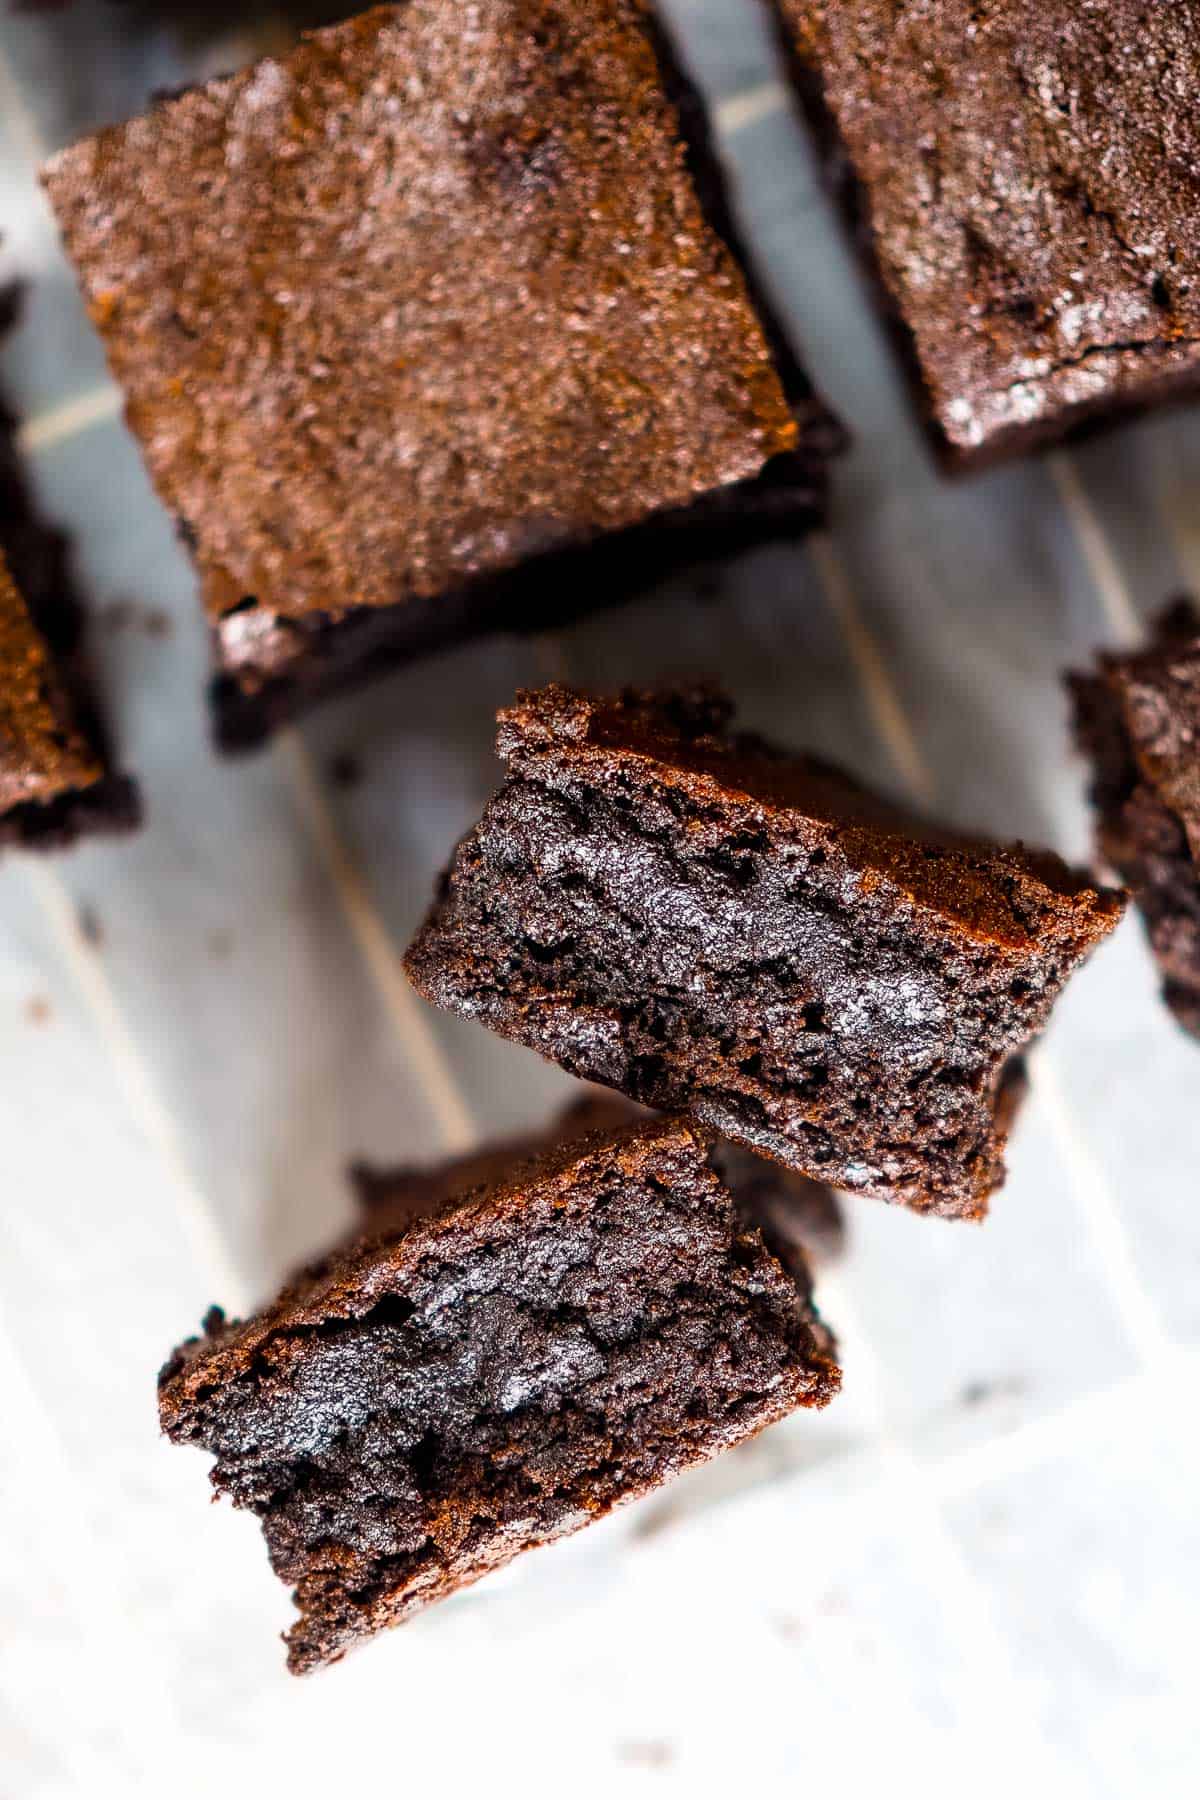 Side view of square blocks of chocolate brownies